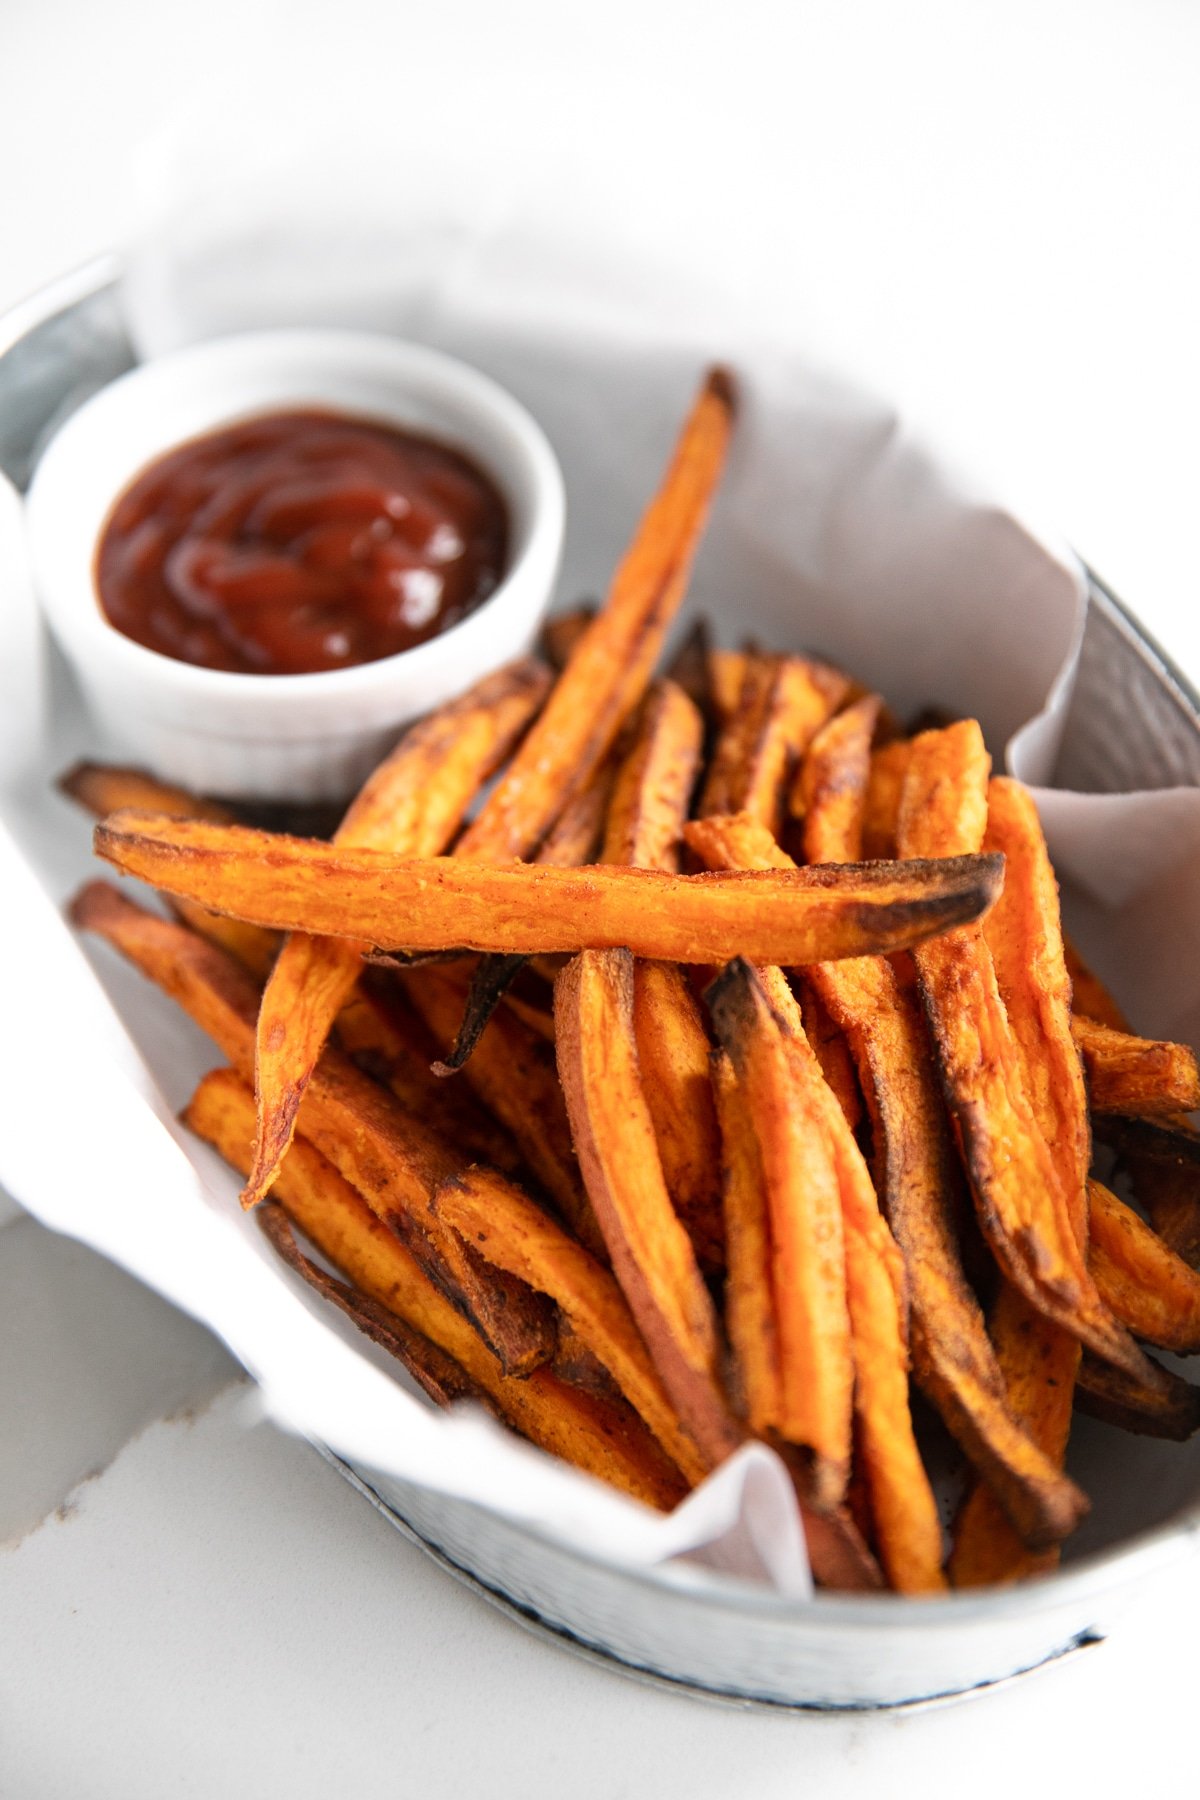 Crispy sweet potato fries made in the air fryer and served in a small metal tin with ketchup.